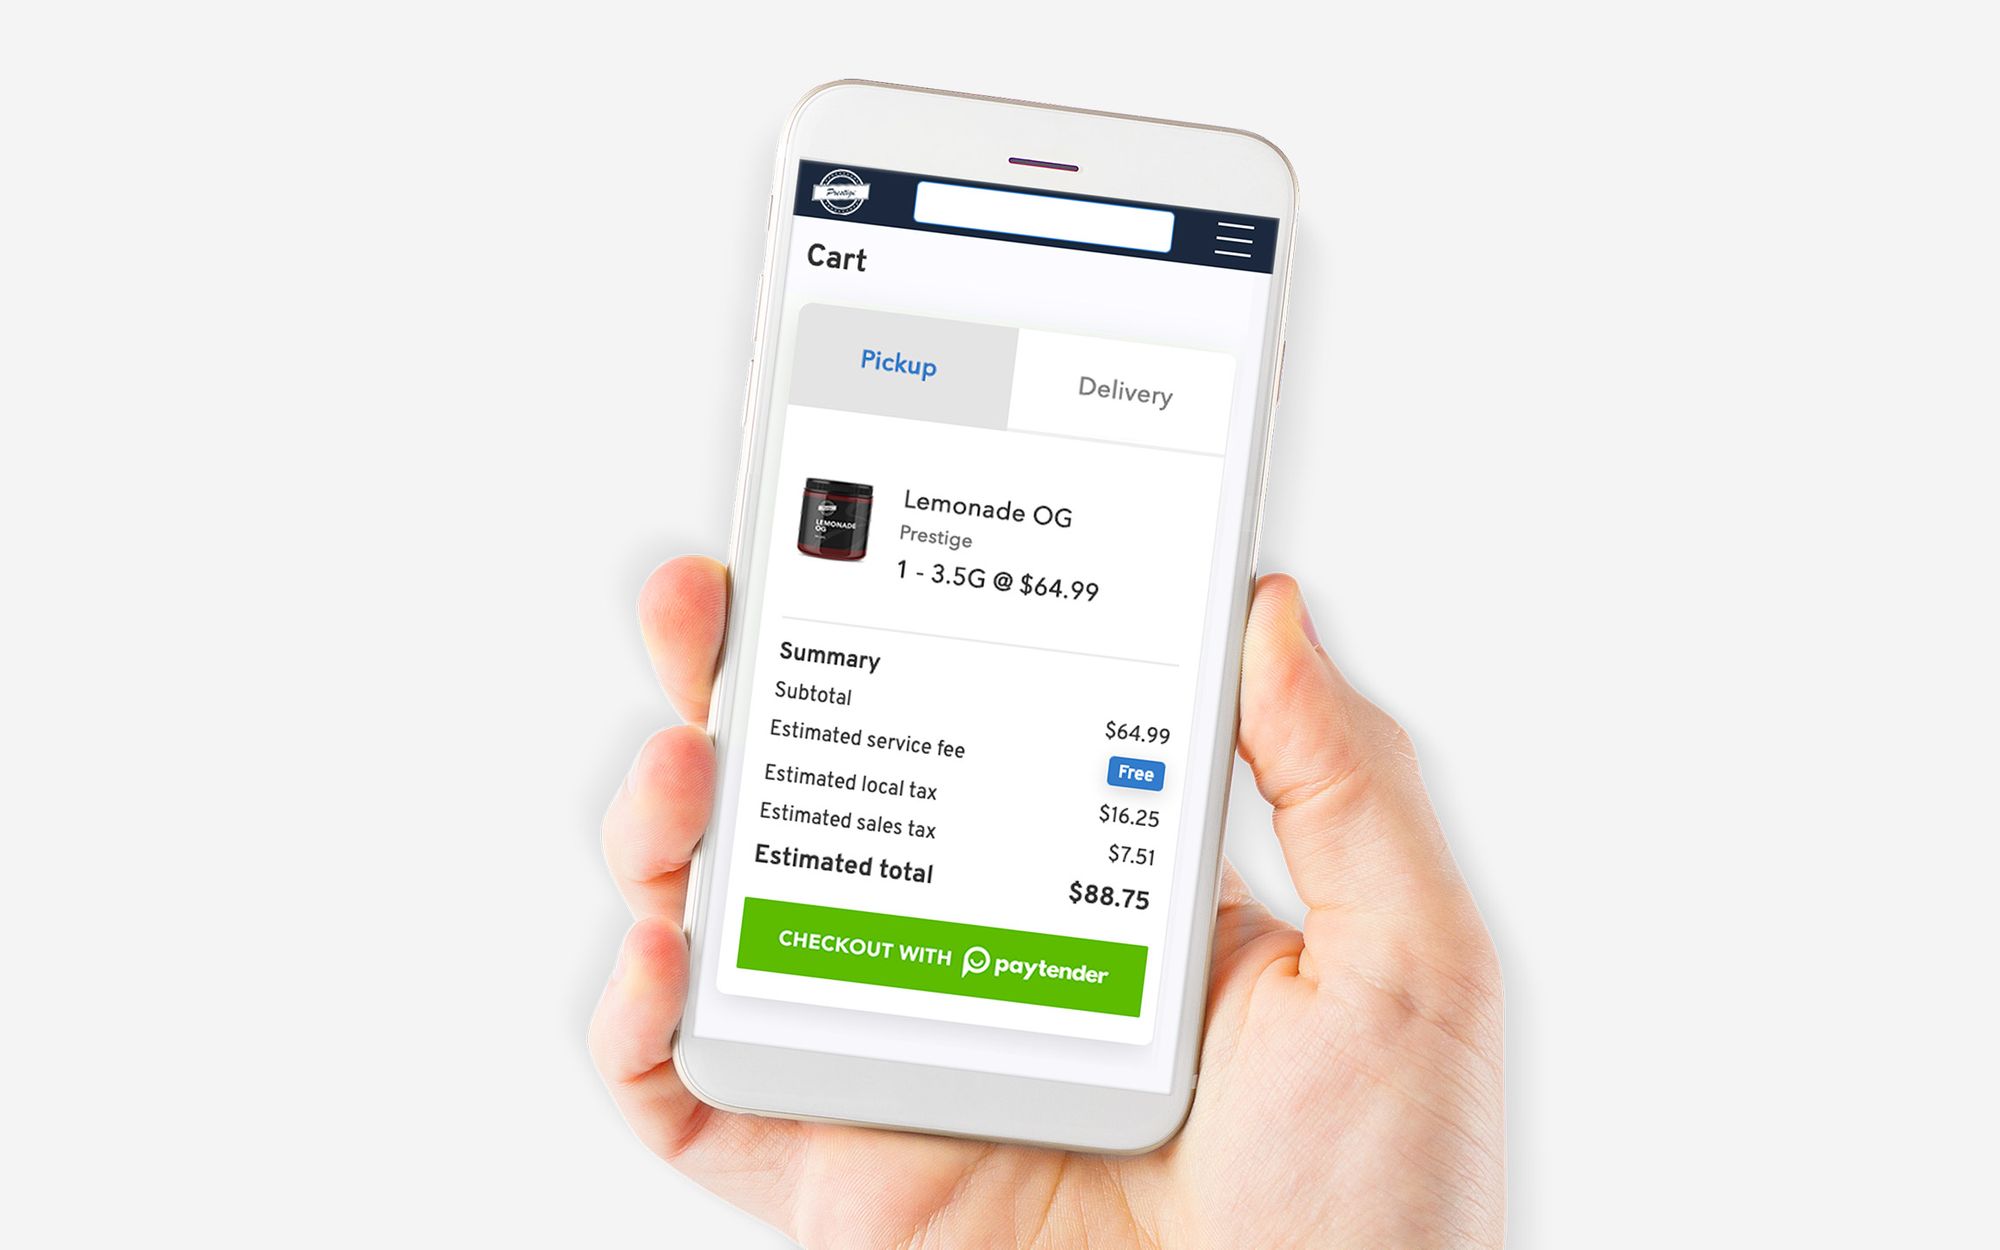 Dama Financial's product Paytender allows safe, mobile-based financial transactions